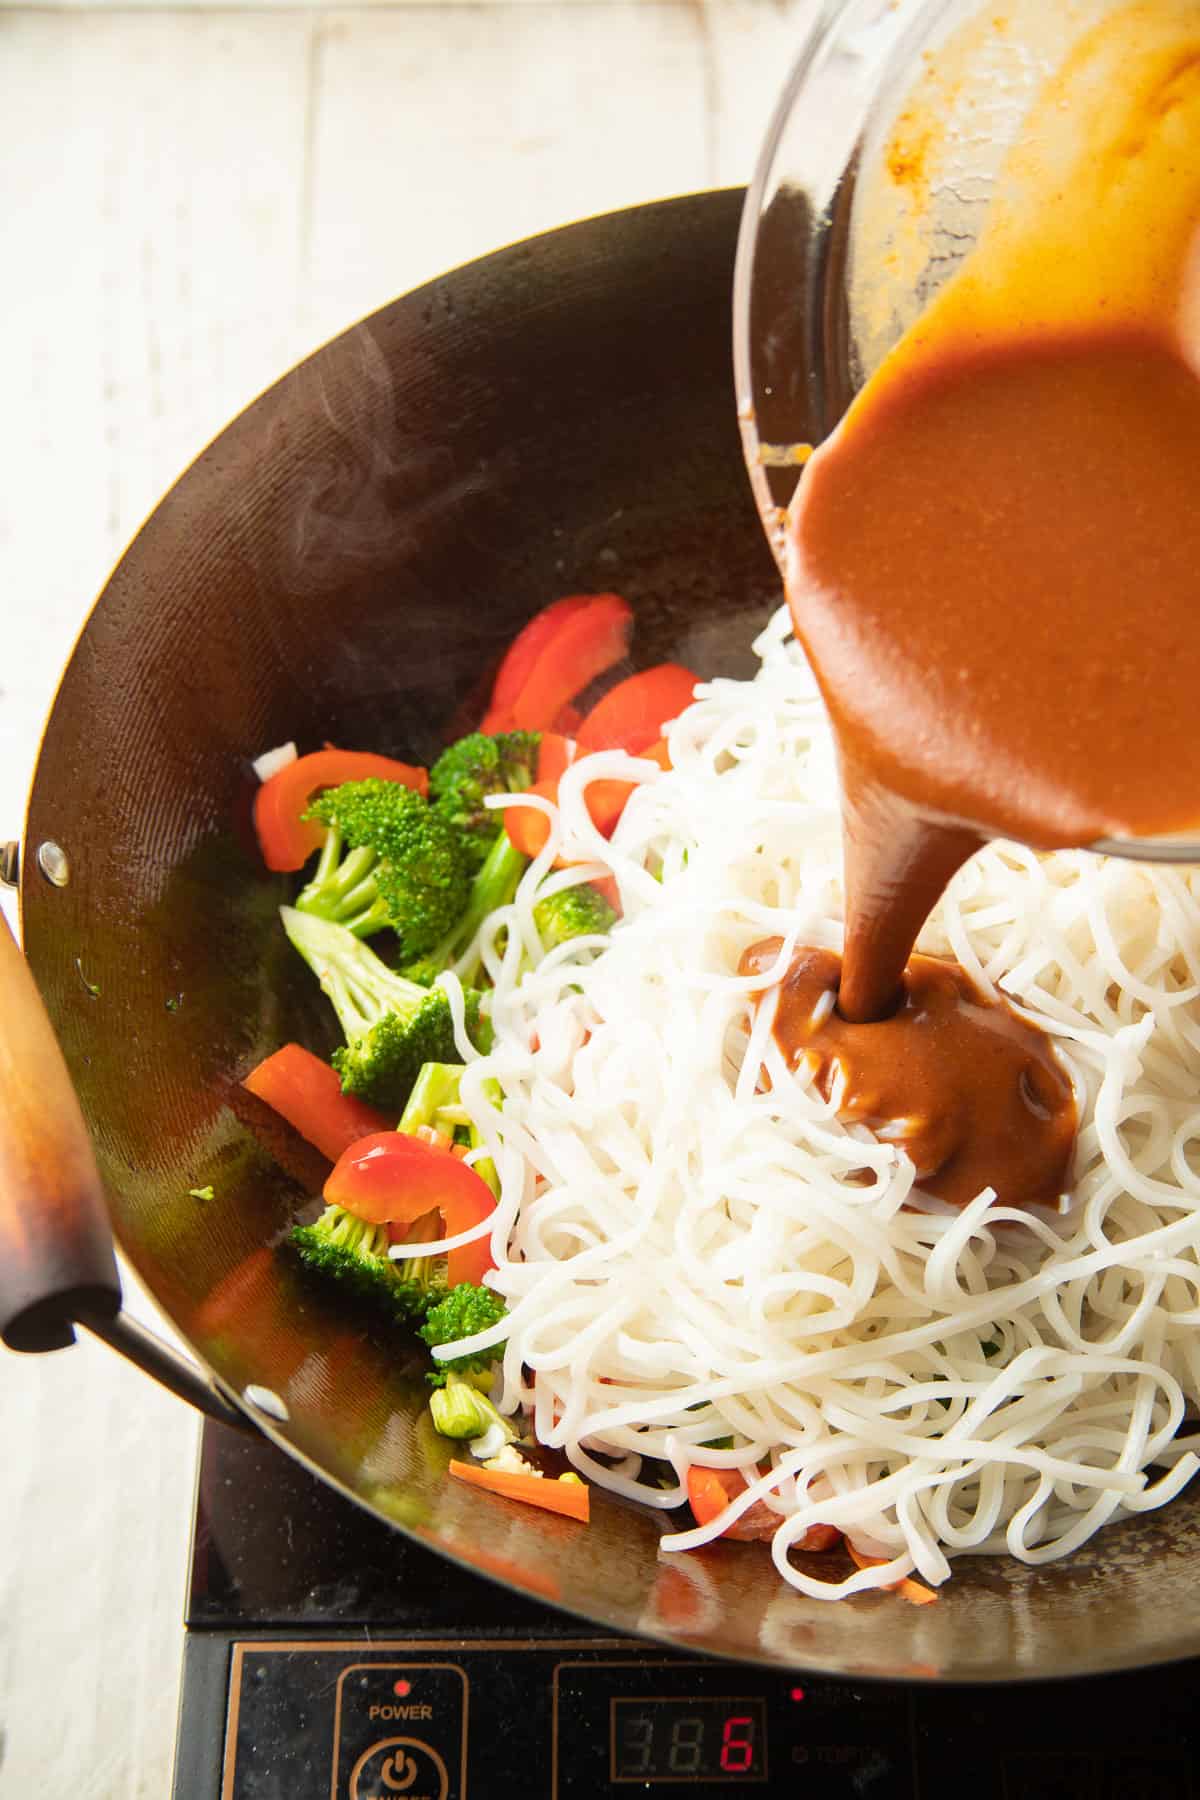 Sauce being poured into a wok filled with vegetables and noodles.